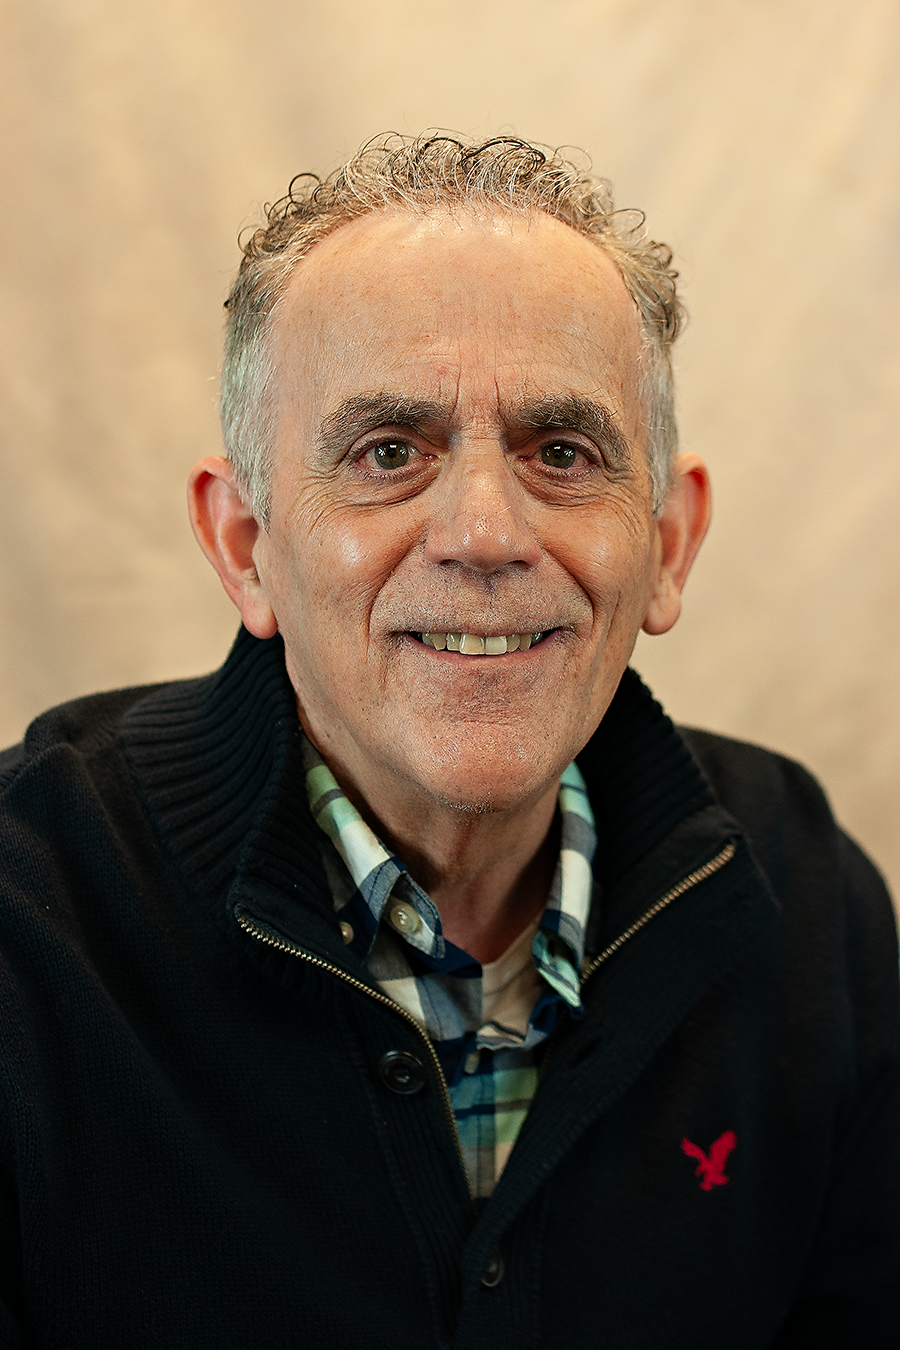 Older white man with grey hair, wearing a plaid shirt and a dark pullover. He is smiling.